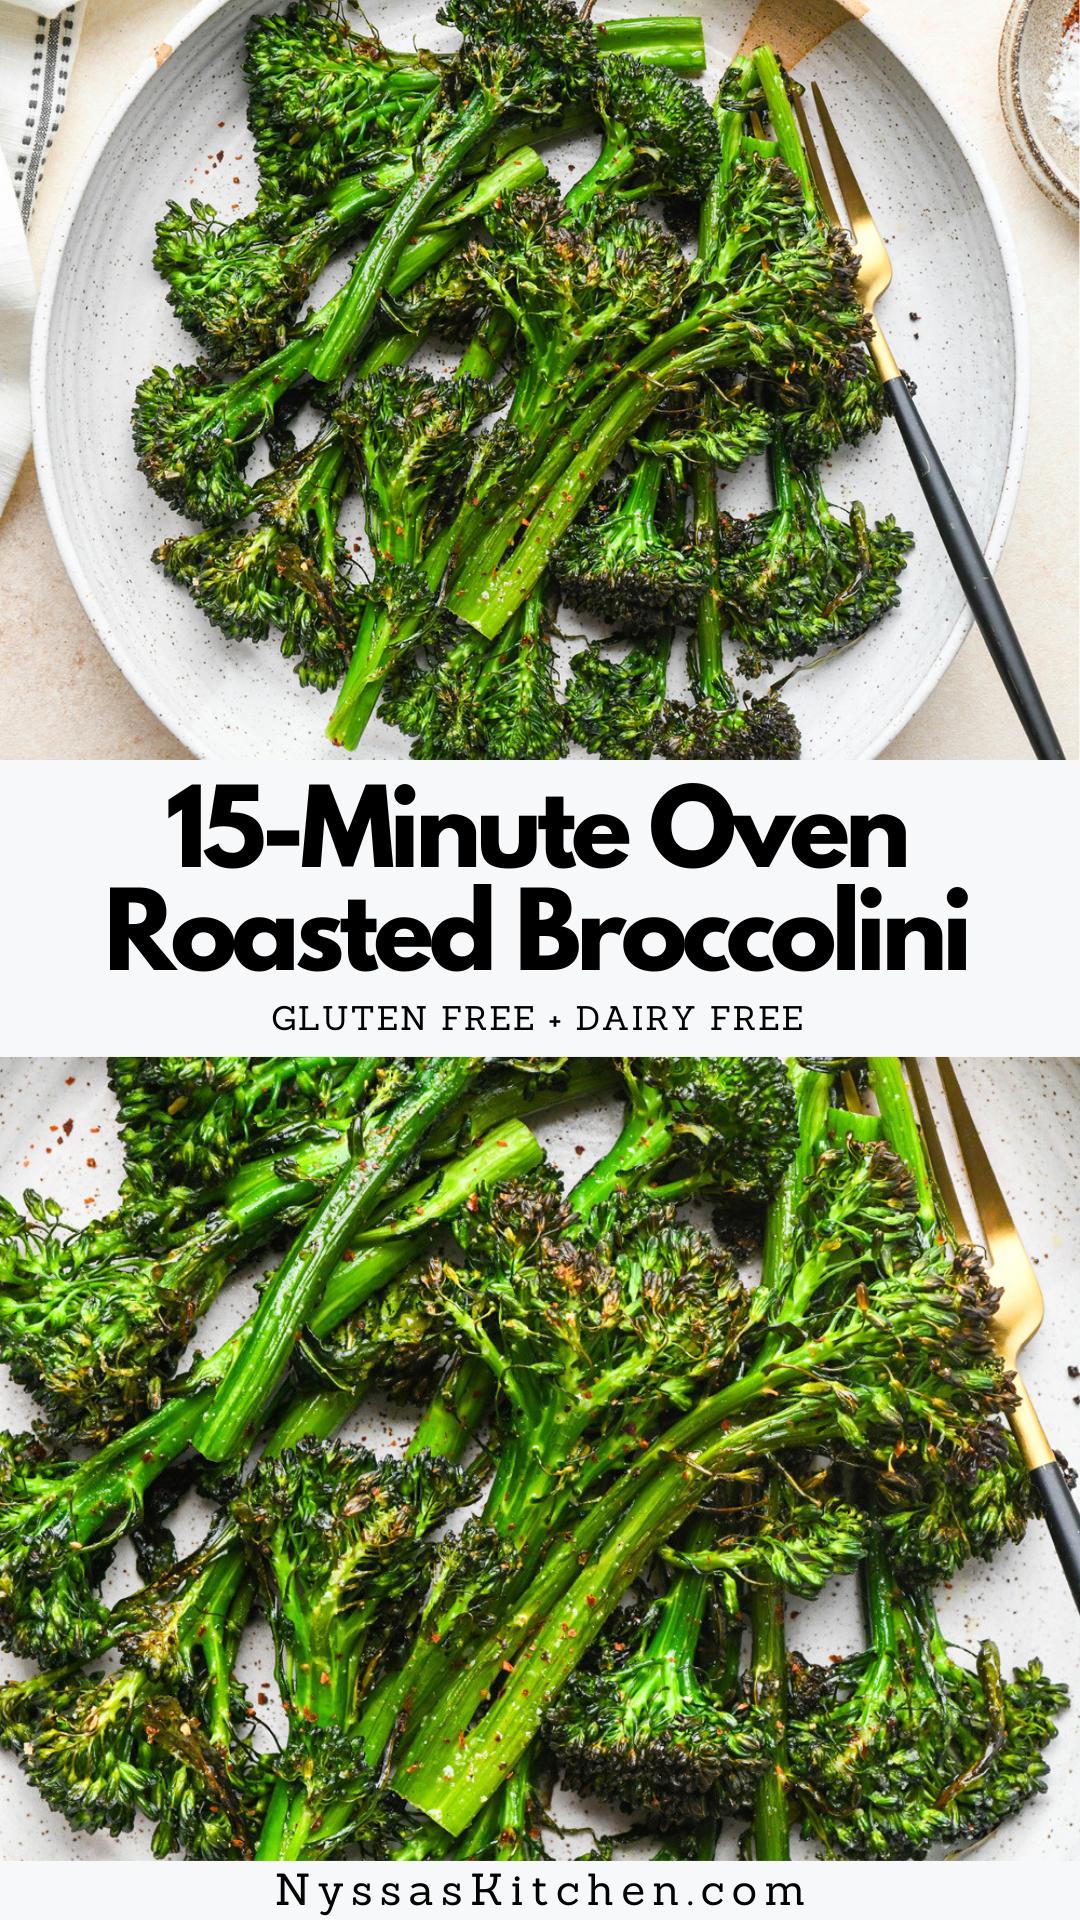 This 15-minute oven roasted broccolini is the best quick side dish that pairs well with so many meals! It’s one of our all-time favorites when we need a simple veggie recipe to serve with dinner. Made with broccolini (also sometimes called baby broccoli), olive oil, and a few simple spices – it cooks quickly in the oven on a sheet pan until tender with slightly charred florets. The recipe is not only delicious but also nutrient-dense, gluten-free, dairy-free, Whole30 compatible, and paleo-friendly!